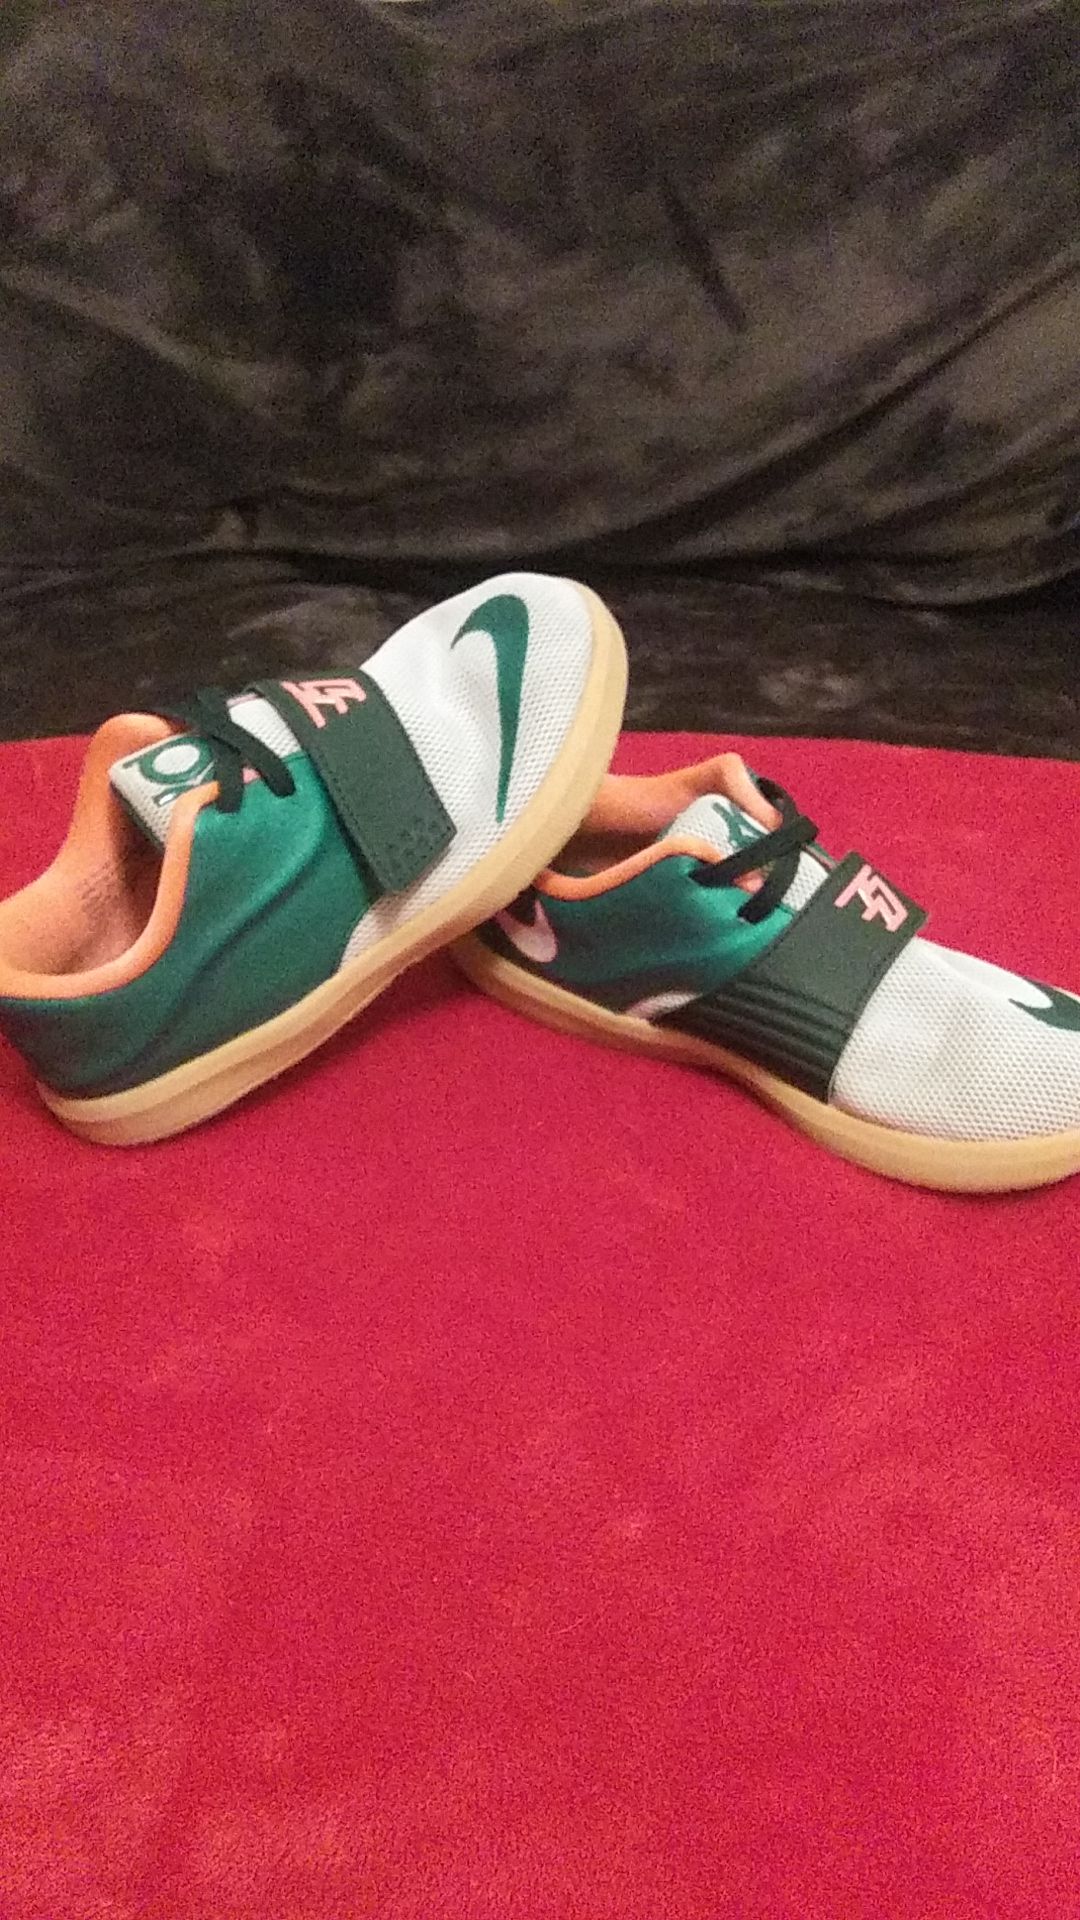 Nike KD VII shoes size 10c Mystic Green